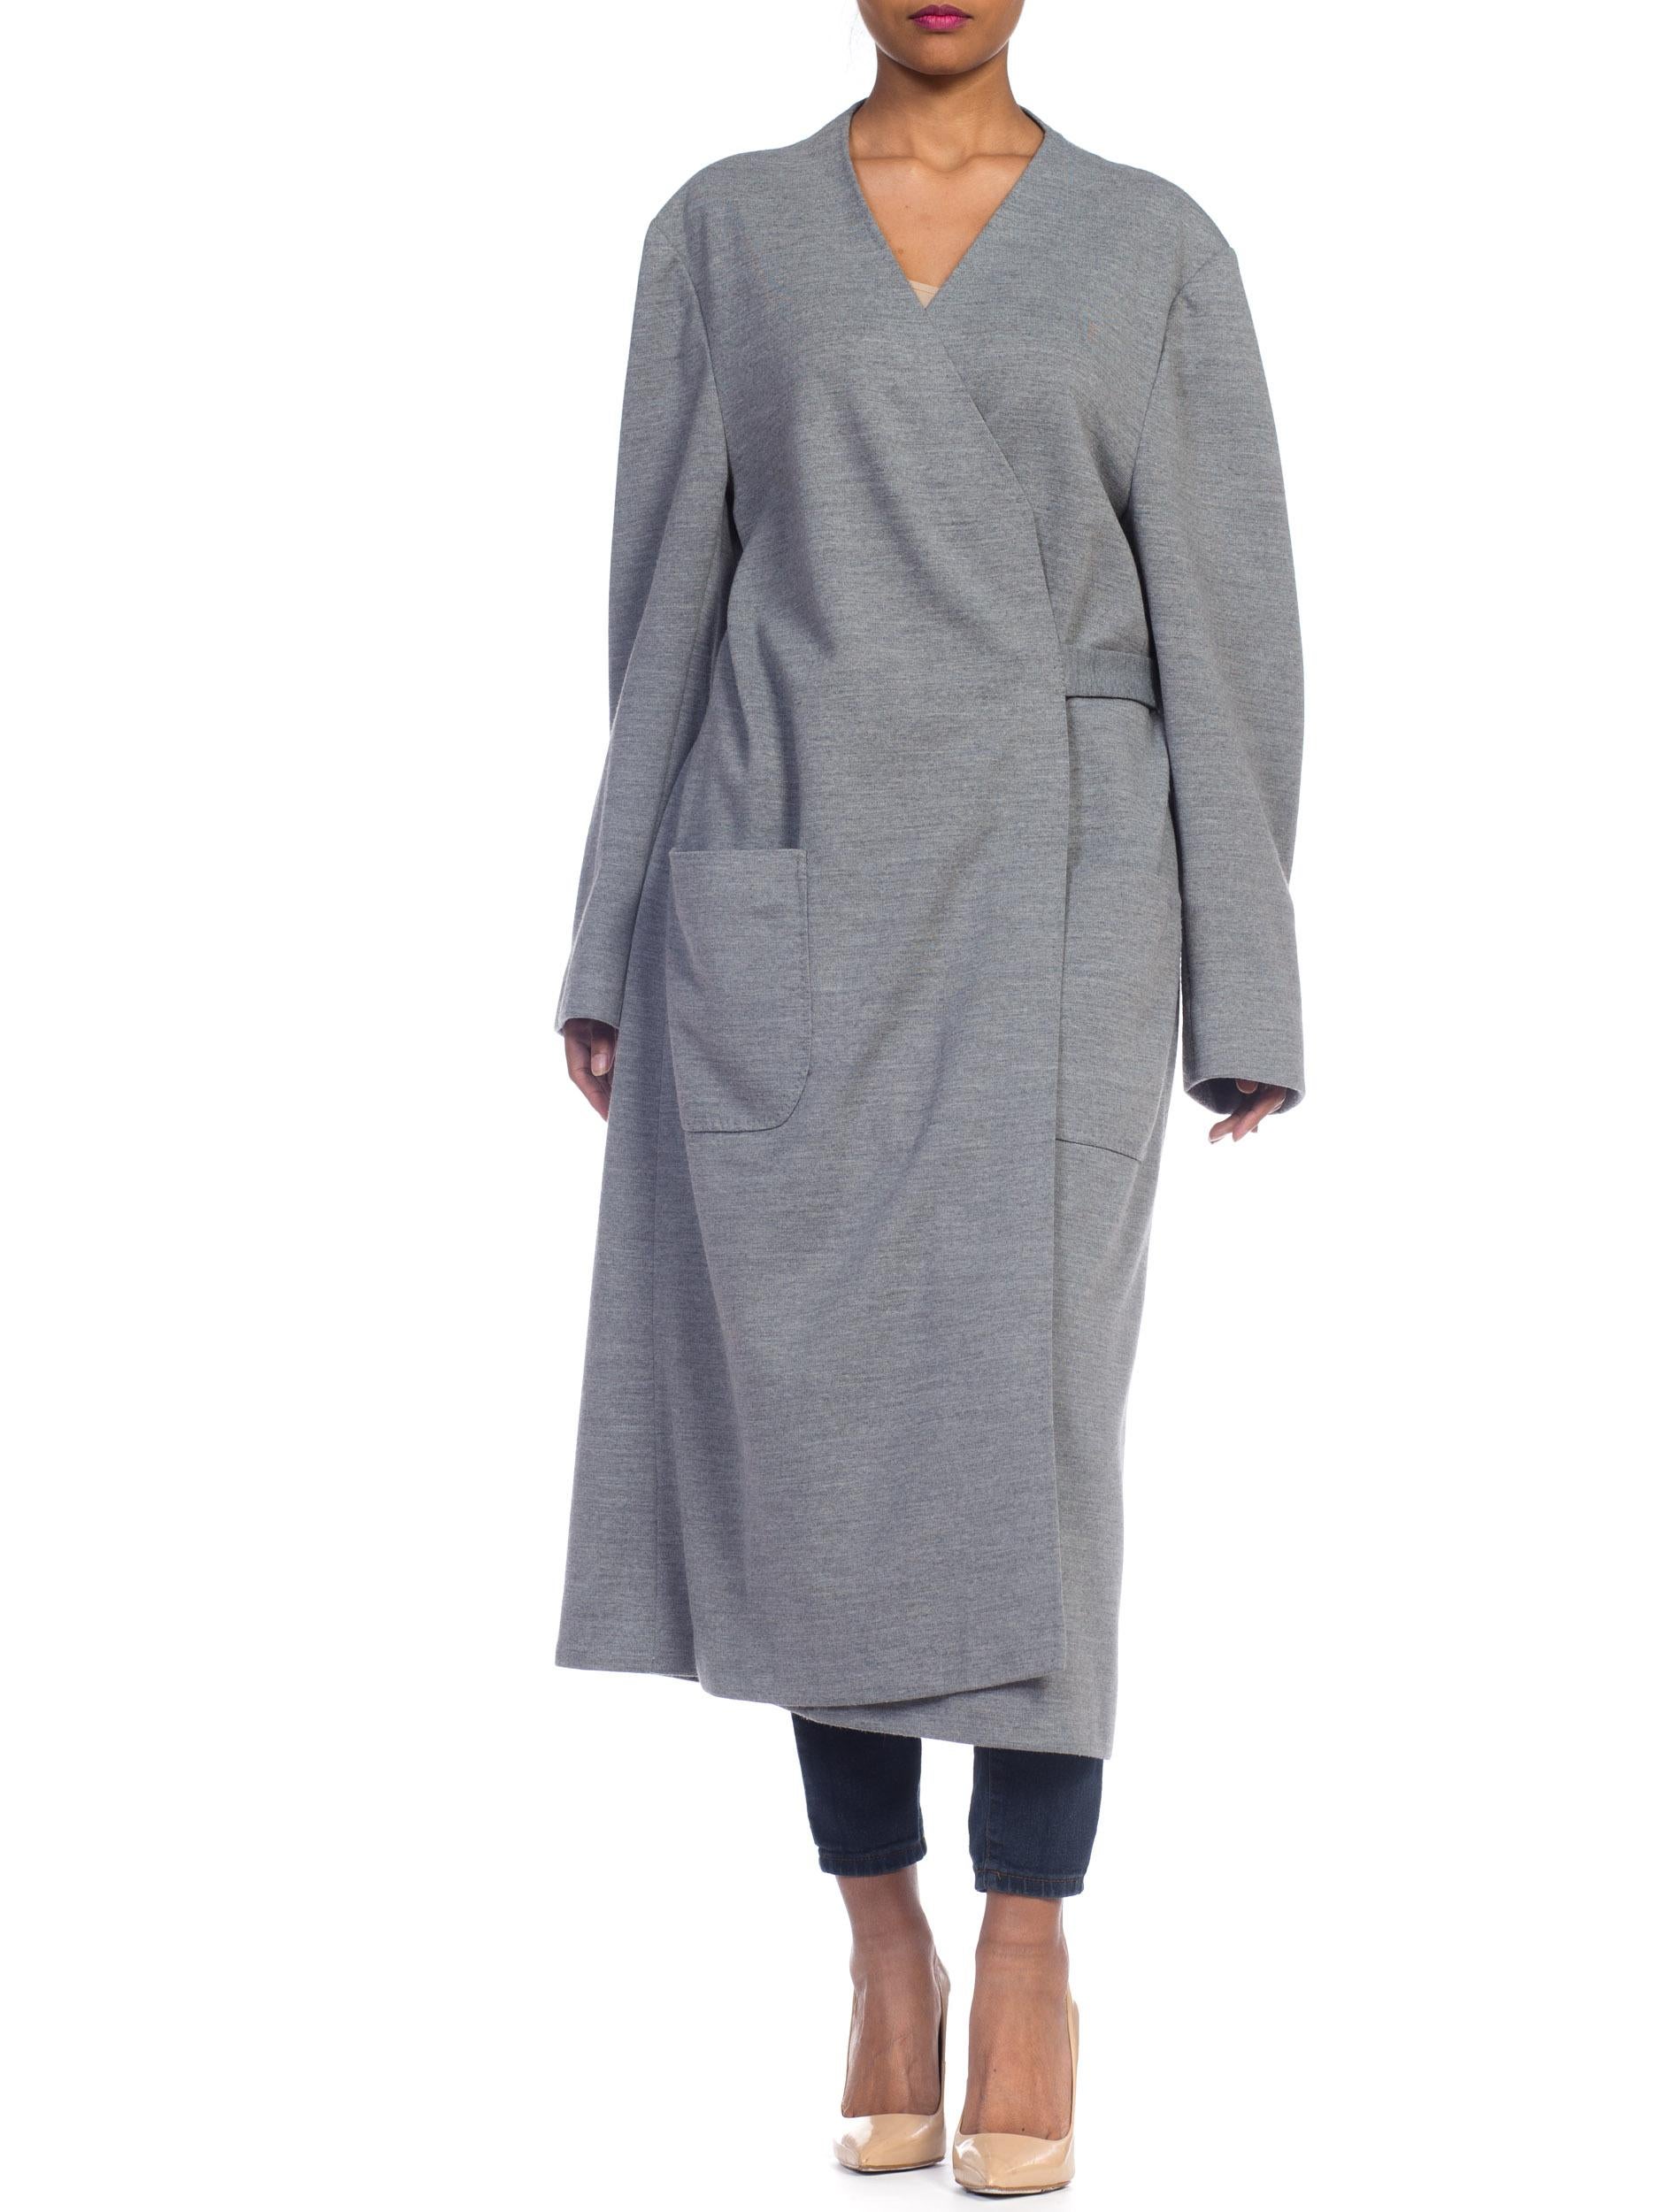 Gray 1980S Heather Grey Wool Knit Handmade Unlabeled Couture Wrap Sweater Coat For Sale